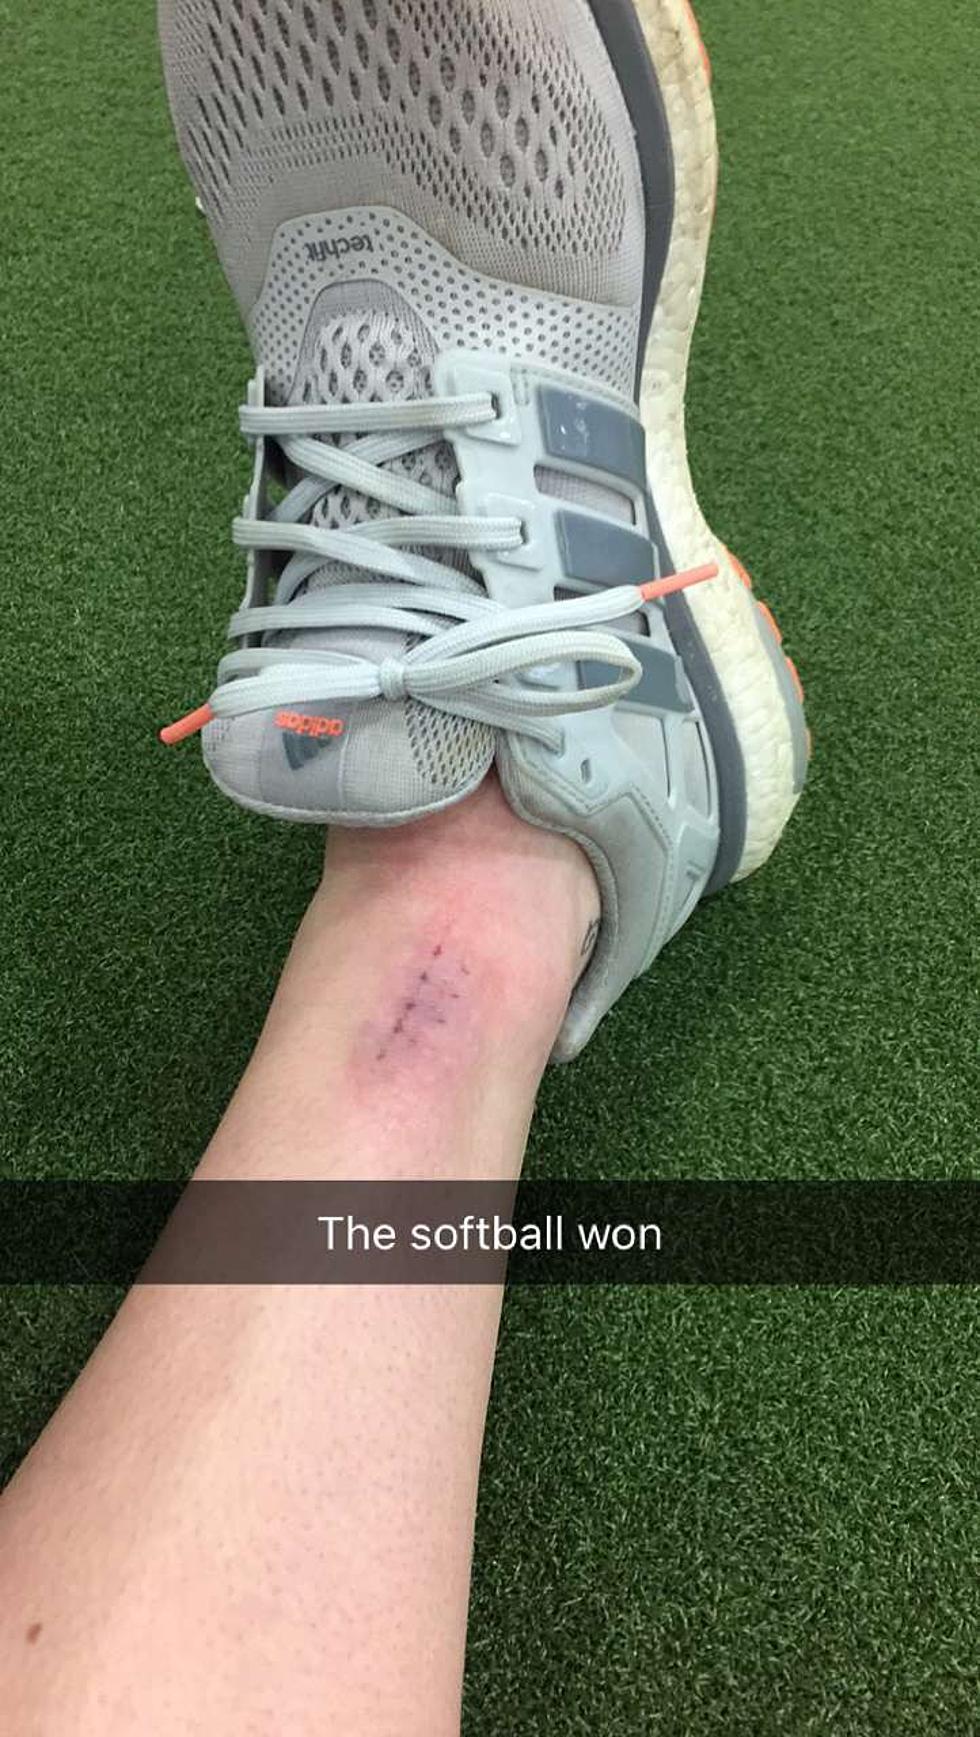 Play Softball They Said, It Will Be Fun They Said